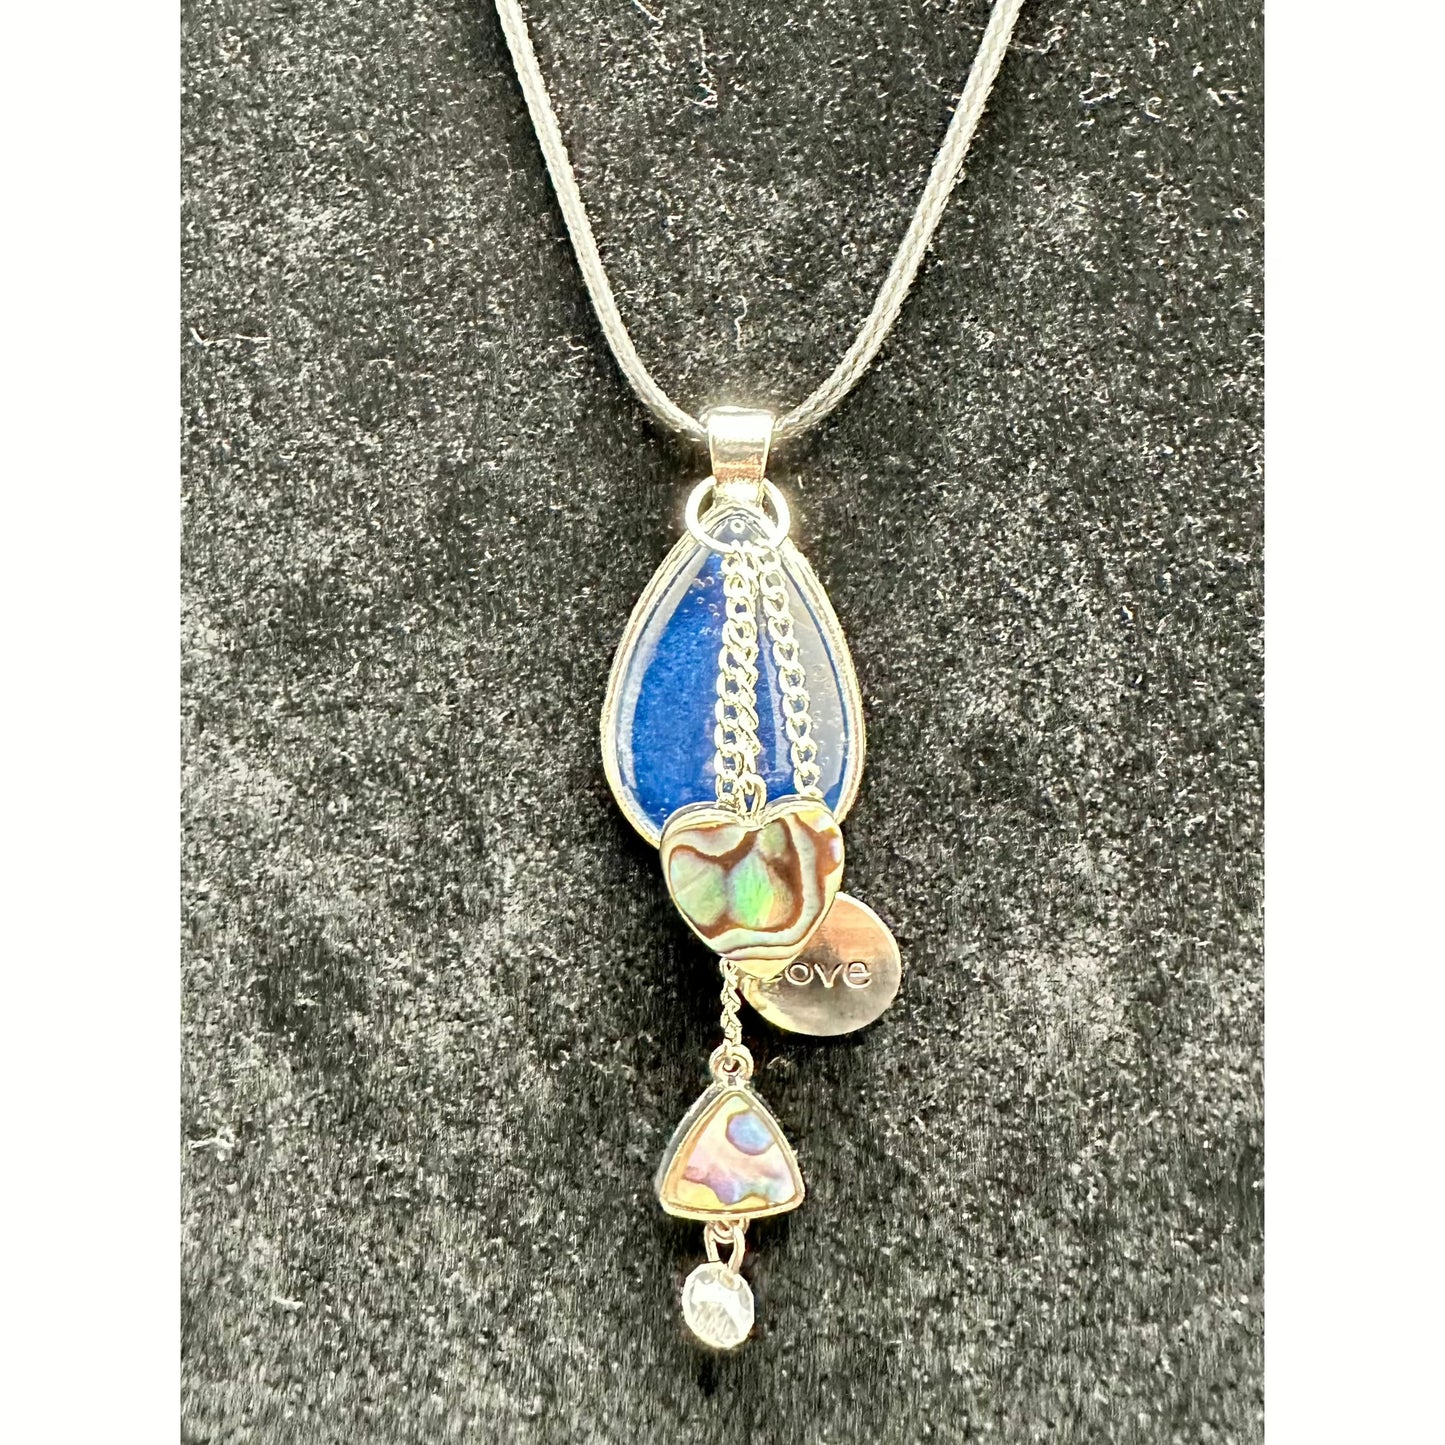 Dewdrop 2 Pendant Necklace - Rhapsody and Renascence